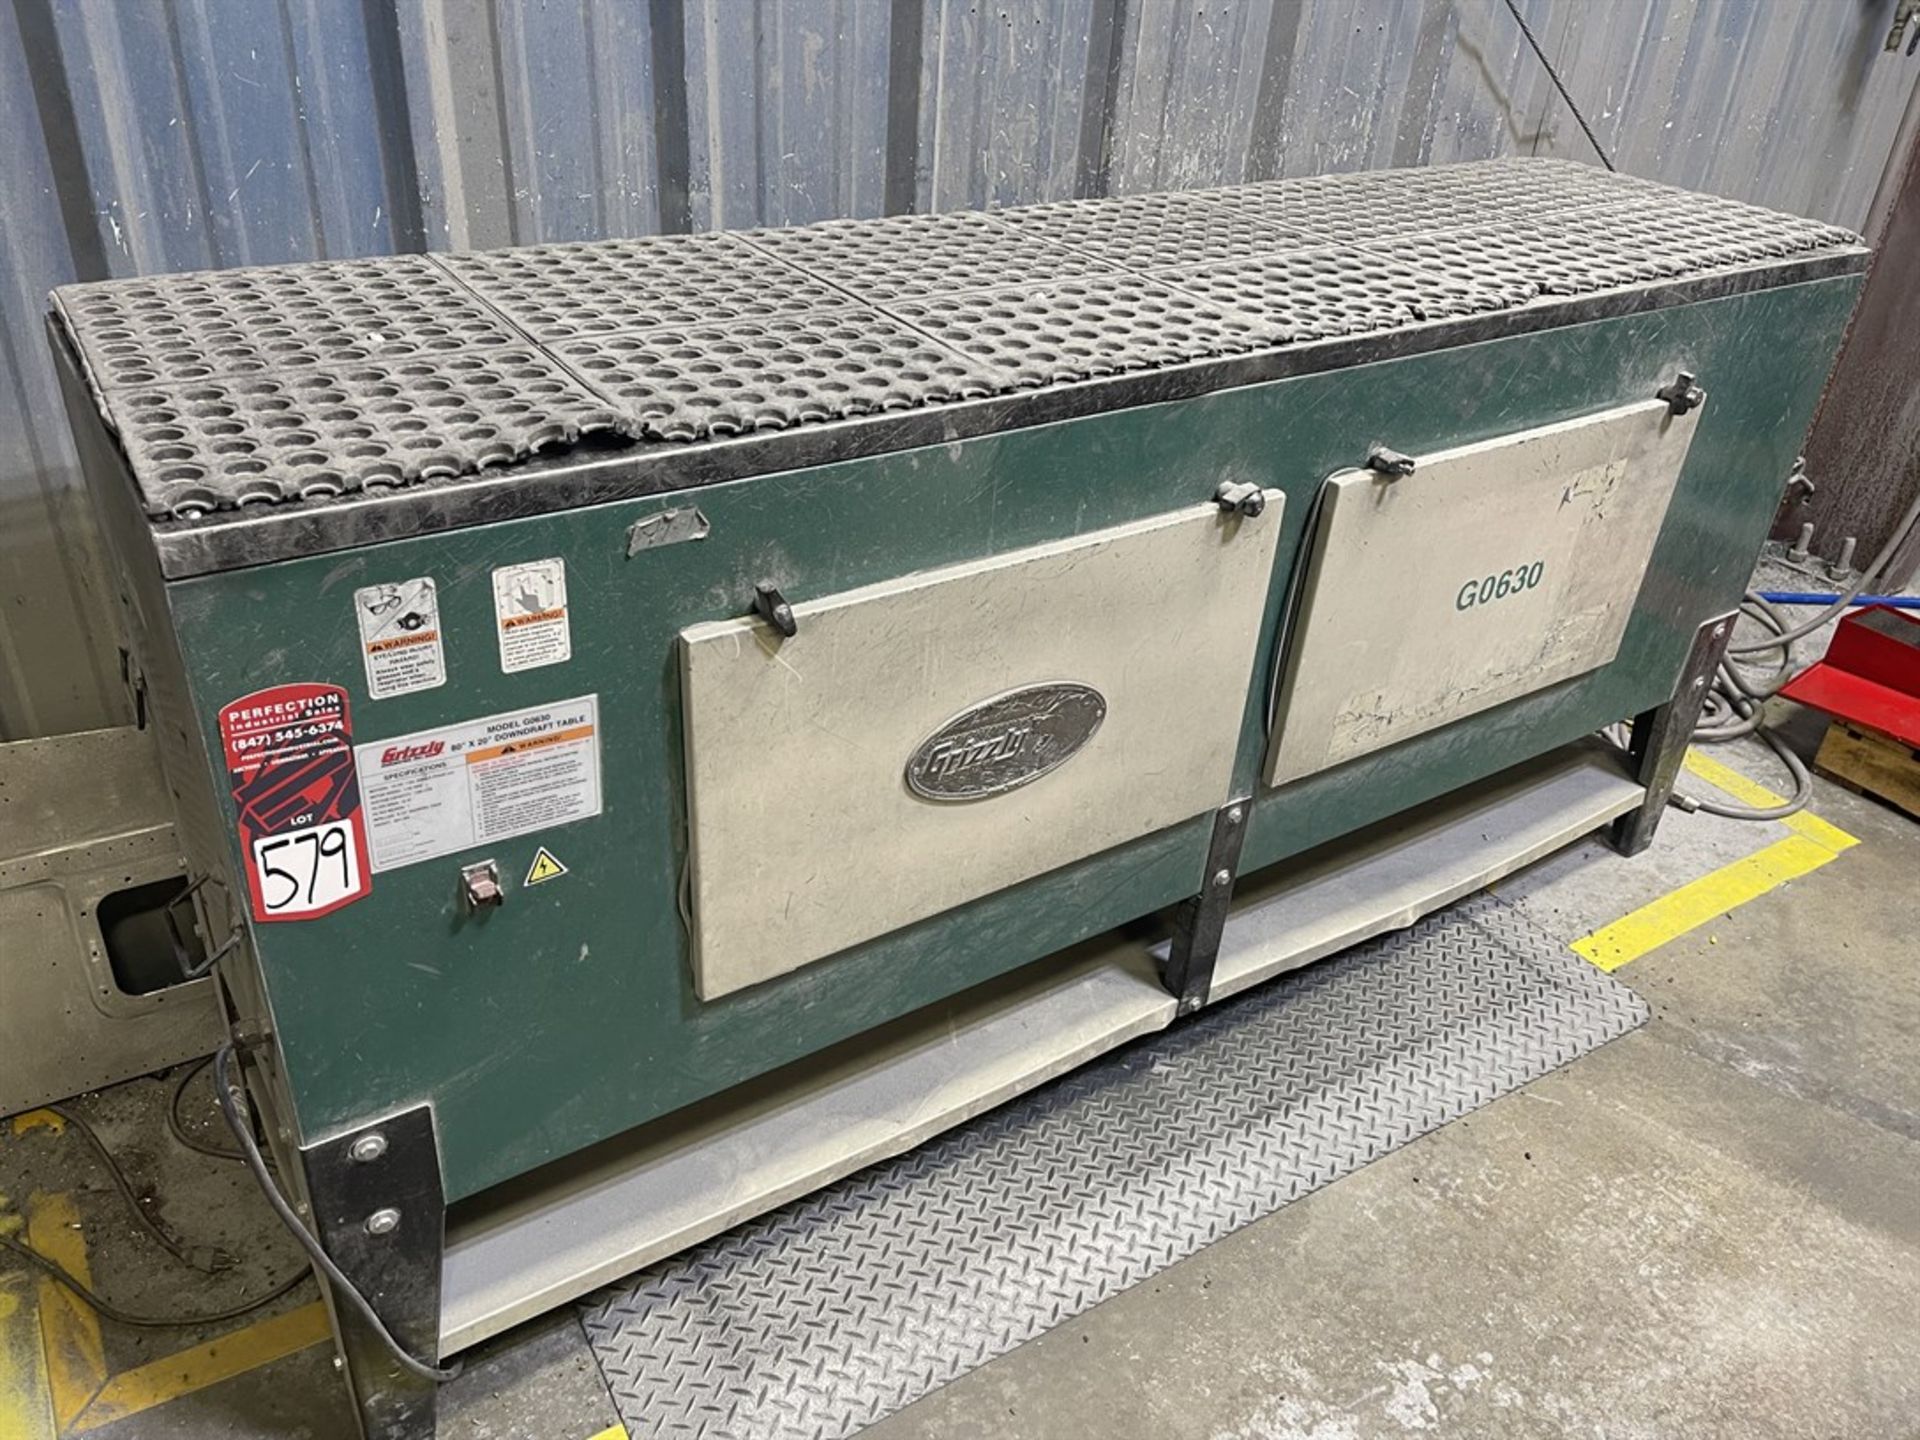 2007 GRIZZLY G0630 Downdraft Table, s/n 072218, 20” x 80” Table, ½ HP, 1140 RPM, 1300 CFM